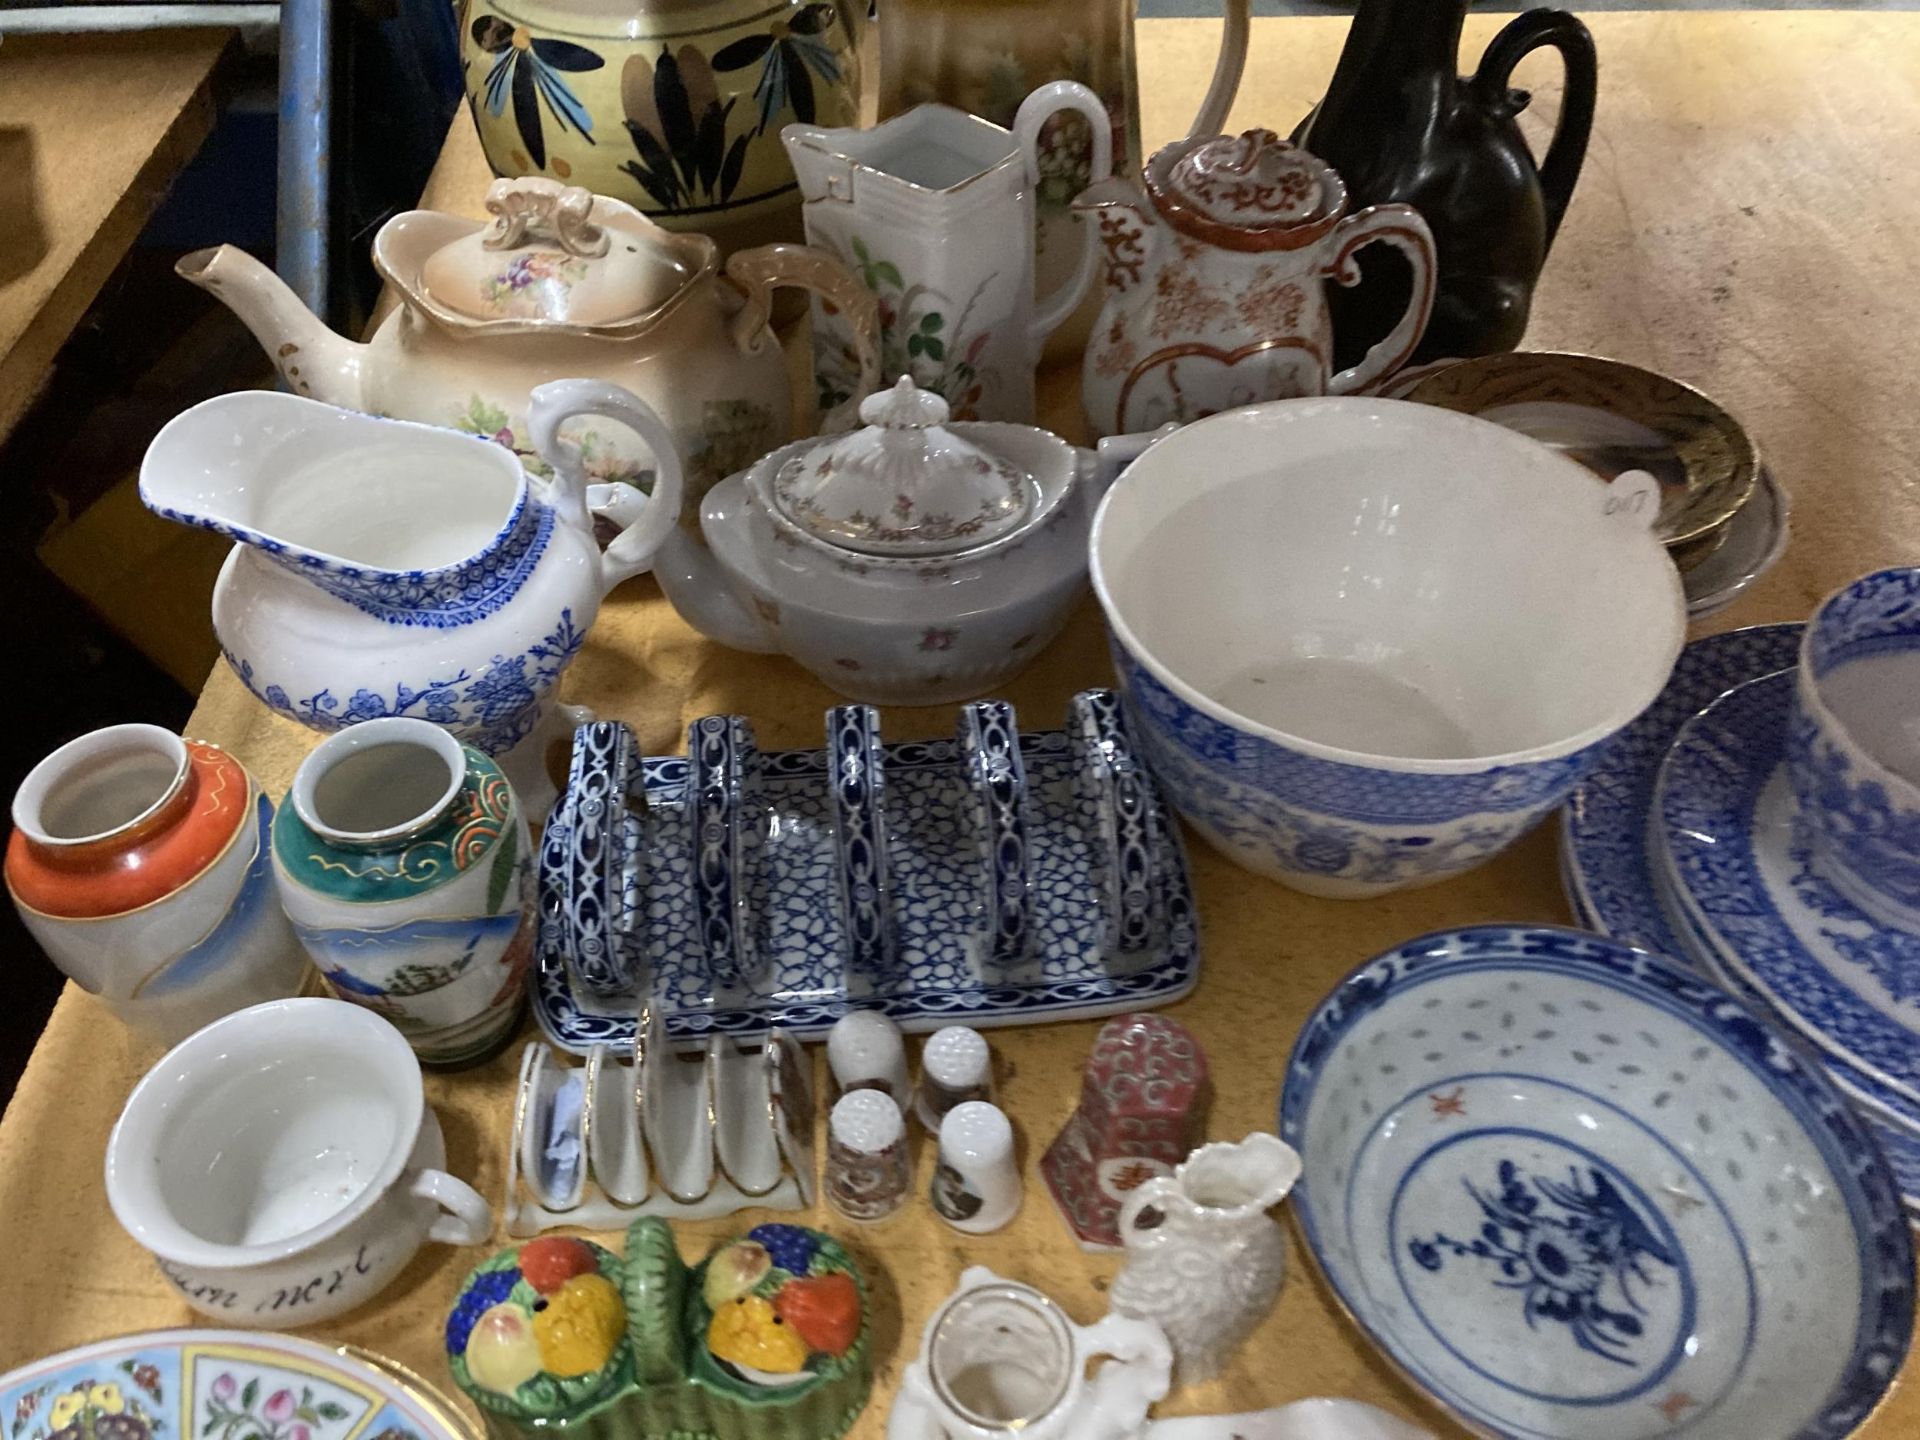 A LARGE QUANTITY OF CERAMIC ITEMS TO INCLUDE JUGS, ORIENTAL PLATES AND BOWLS, TOAST RACKS, ETC - Image 3 of 4